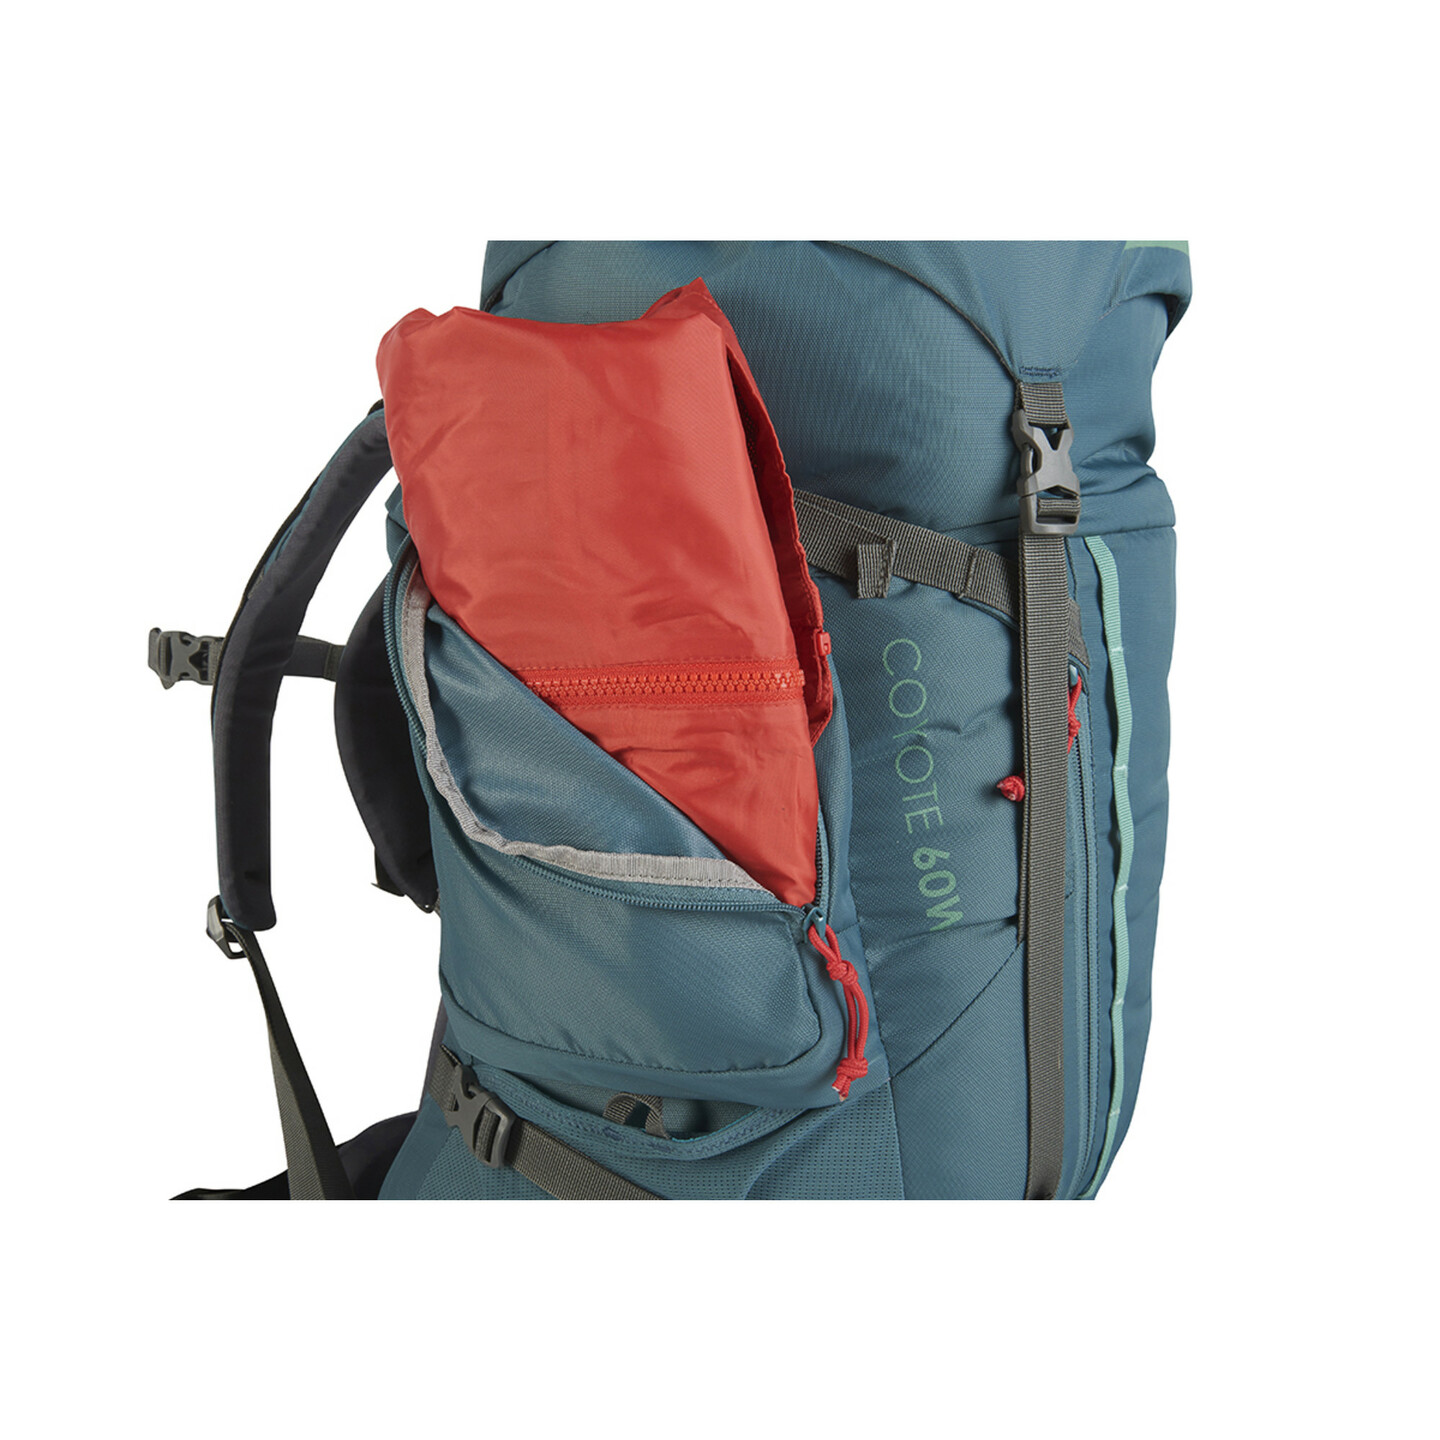 Kelty Women's Coyote 60 Trail Pack